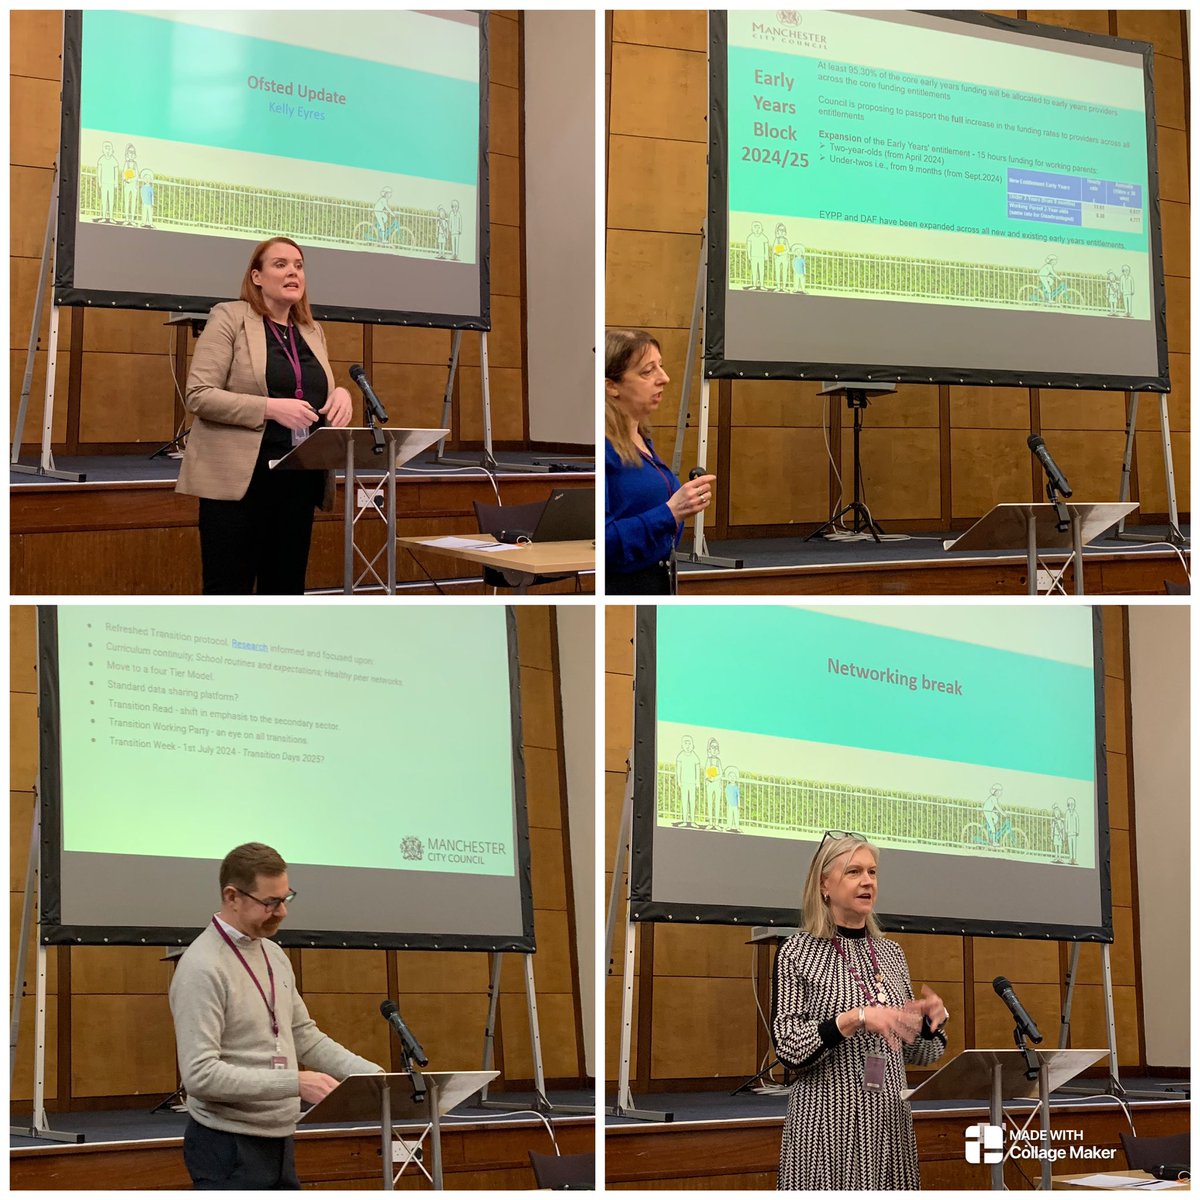 Such an informative start to the morning at Manchester Primary Headteachers Briefing Event @andreadaubs @AmandaCCorcoran @schofield_sonia @Jo_c_gray @KellyEyres @mcr_education @OneEducation